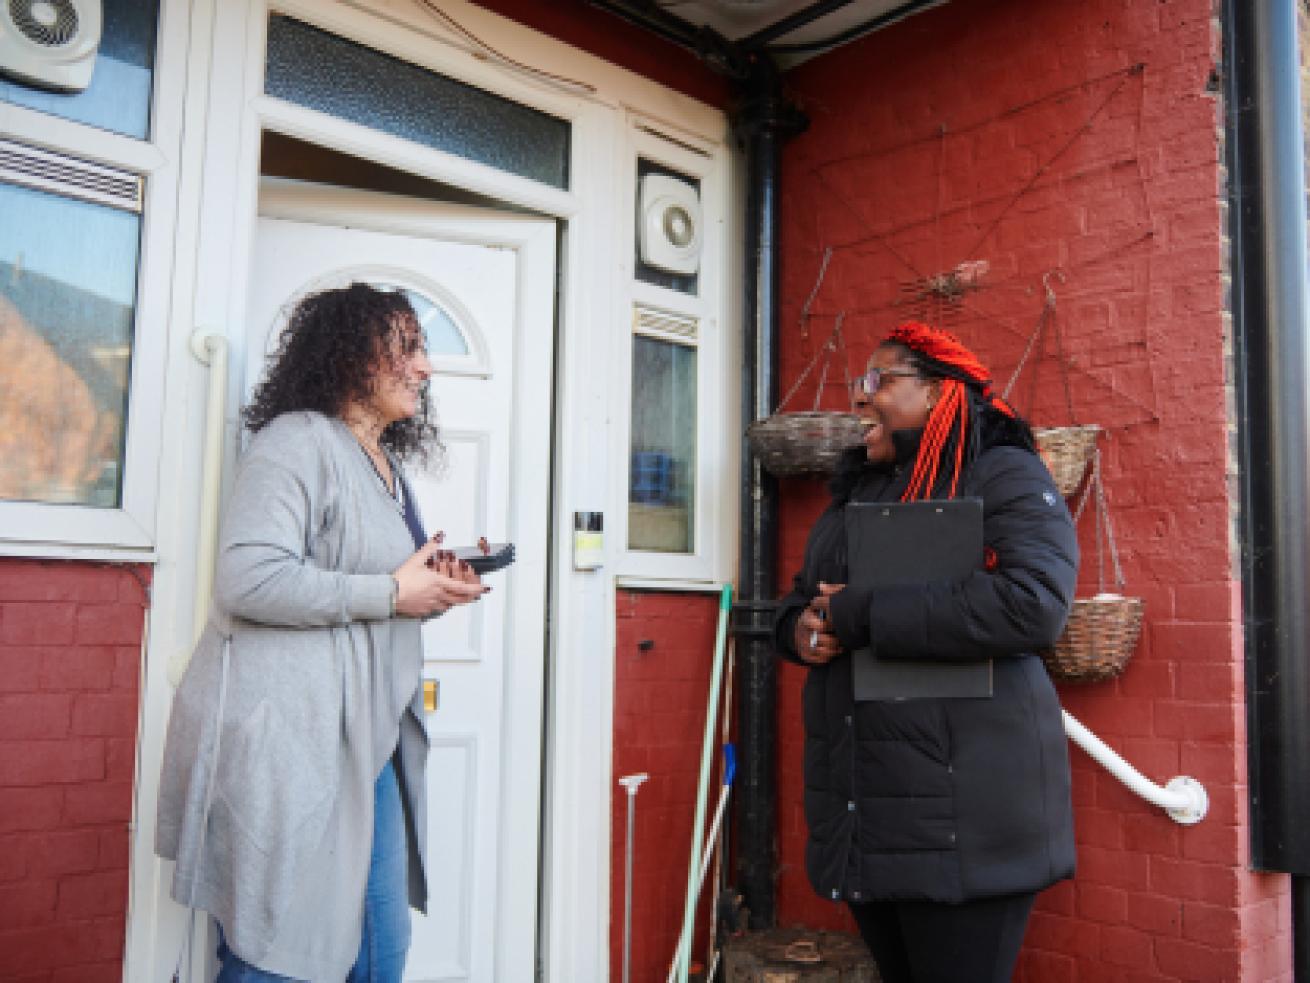 Sanctuary resident talking to a housing officer outside of her front door